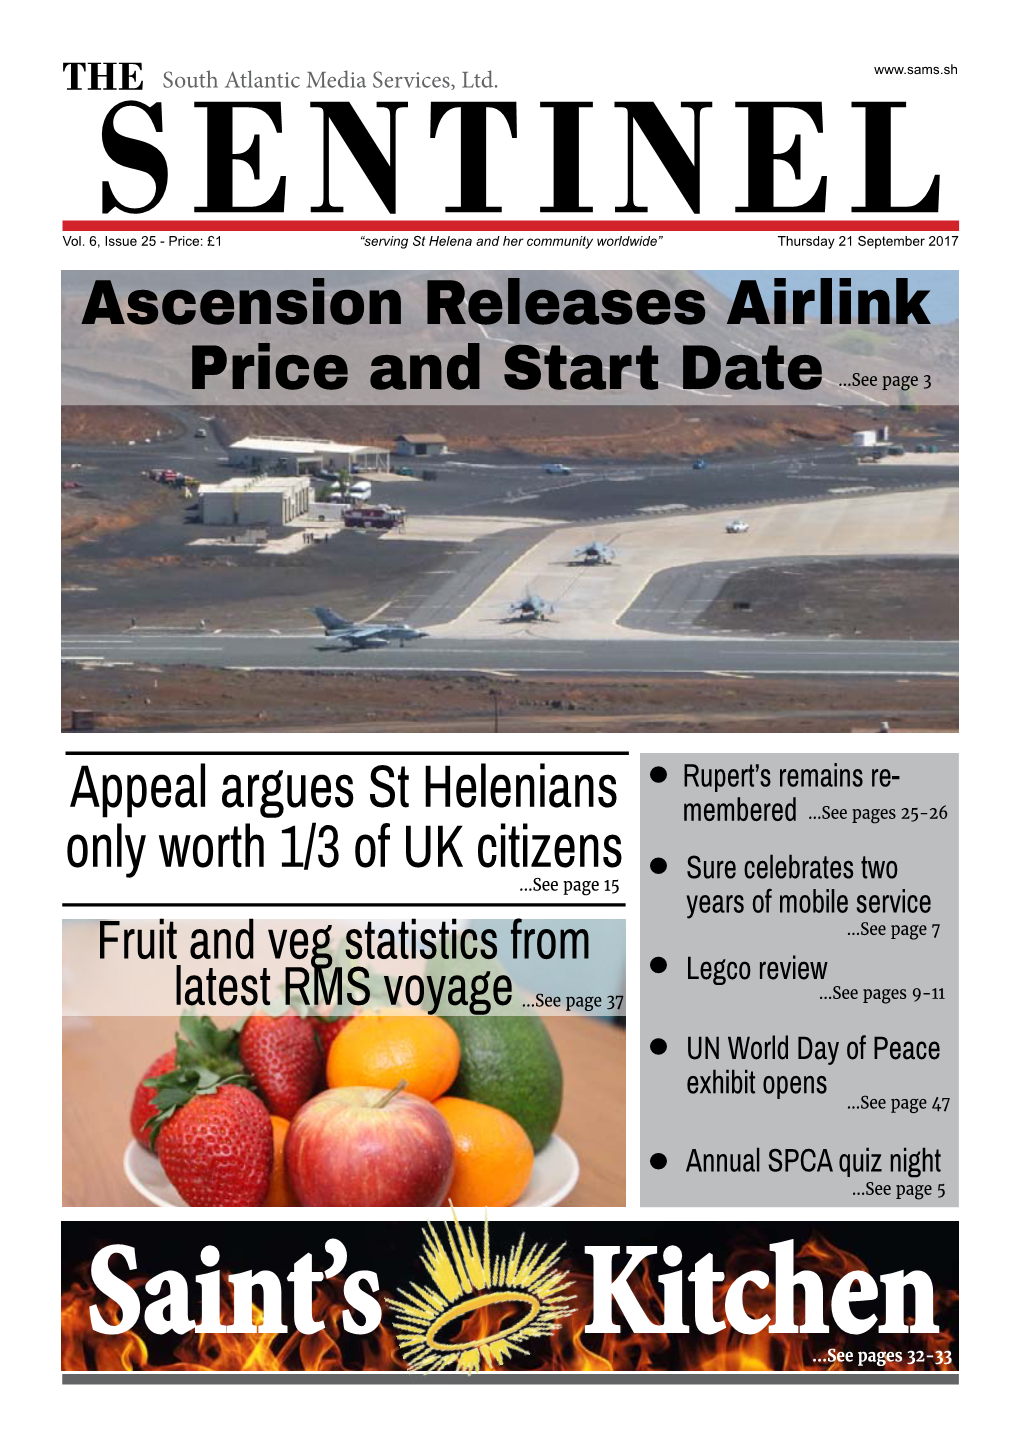 SENTINEL Issue 25 - Price: £1 “Serving St Helena and Her Community Worldwide” Thursday 21 September 2017 Ascension Releases Airlink Price and Start Date ...See Page 3